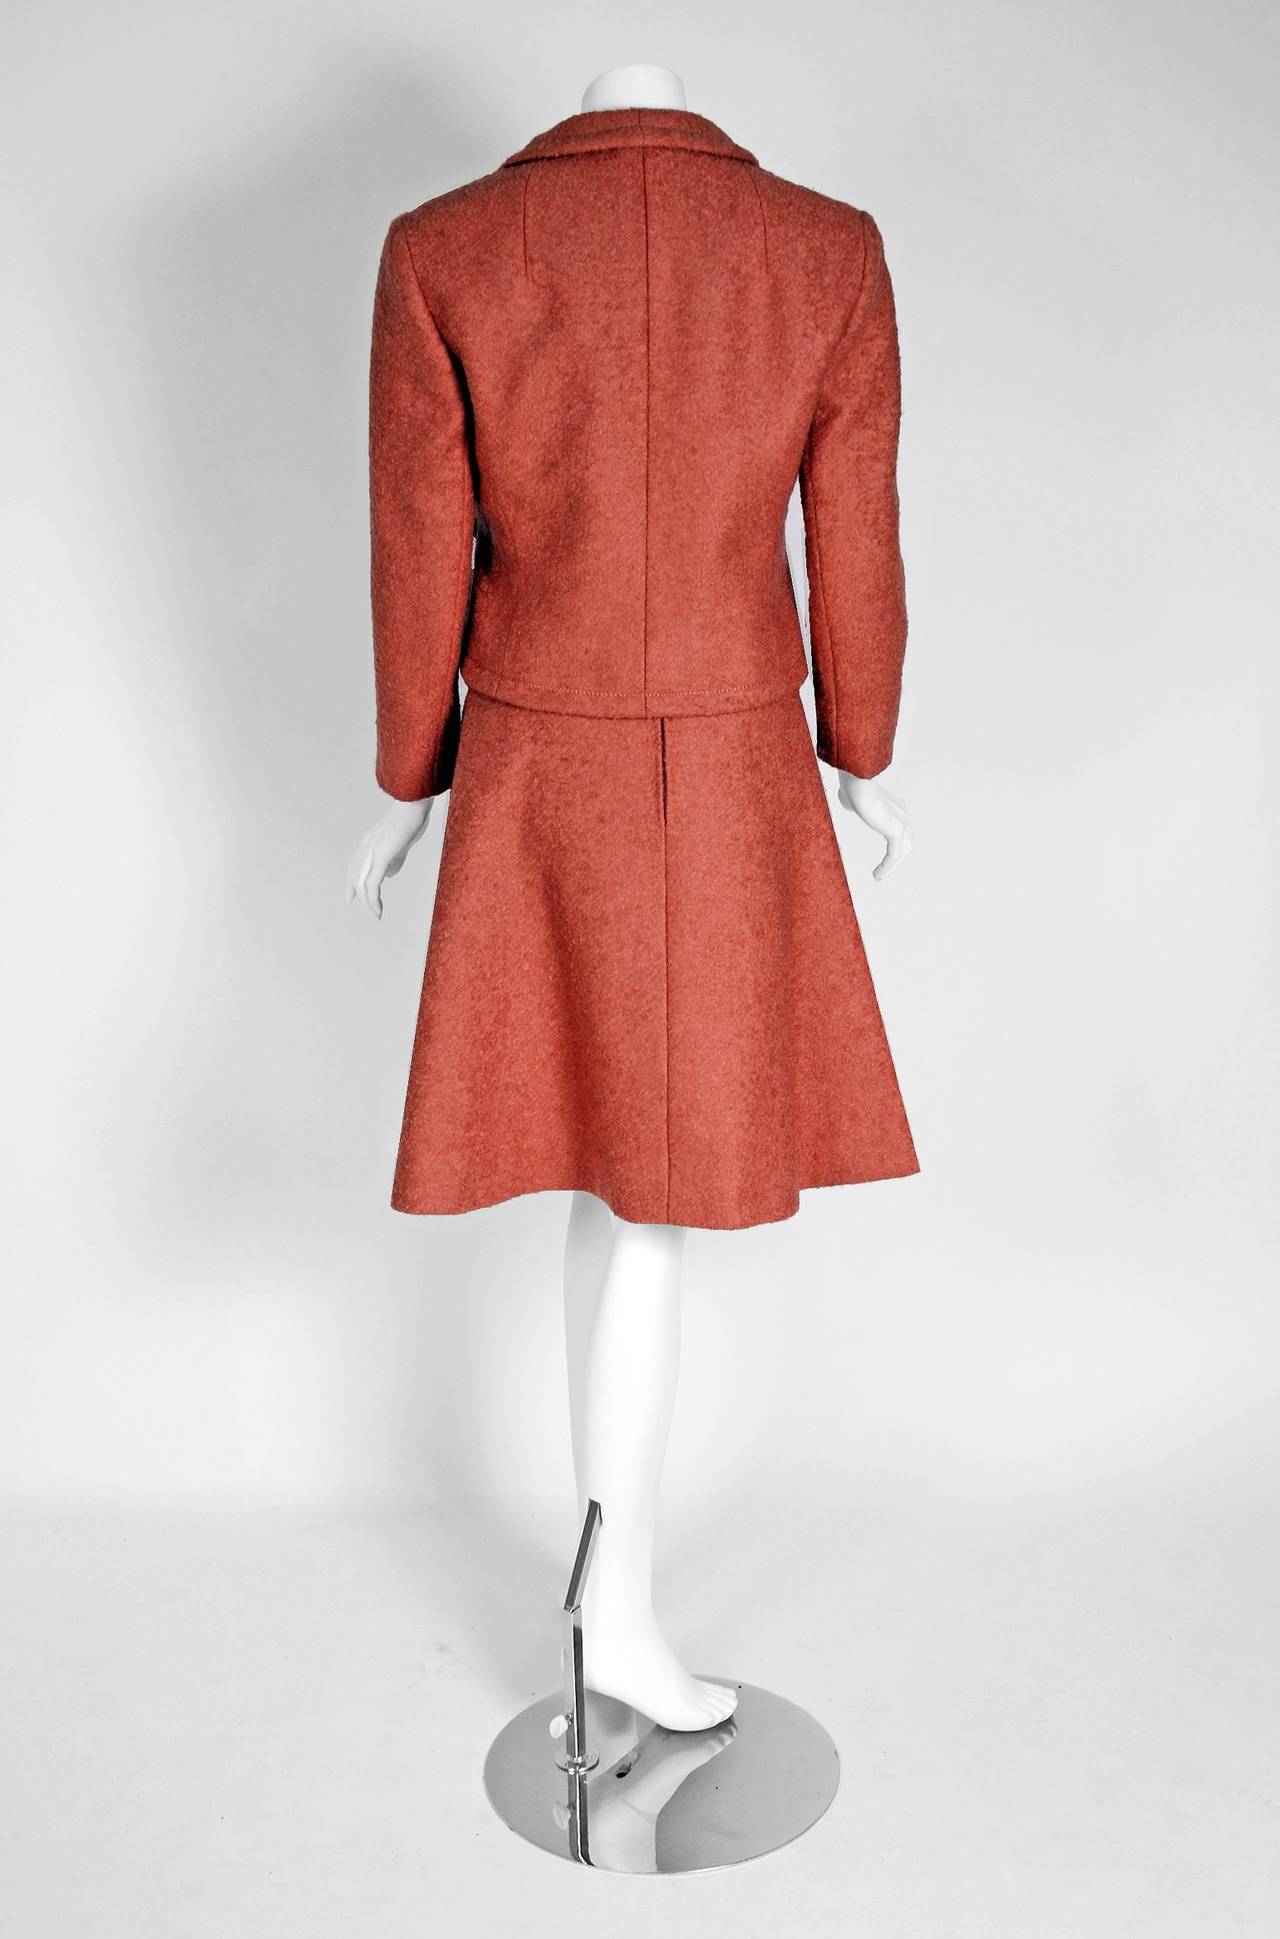 1960 Christian Dior Demi-Couture Documented Apricot Wool Belted Dress Ensemble 1